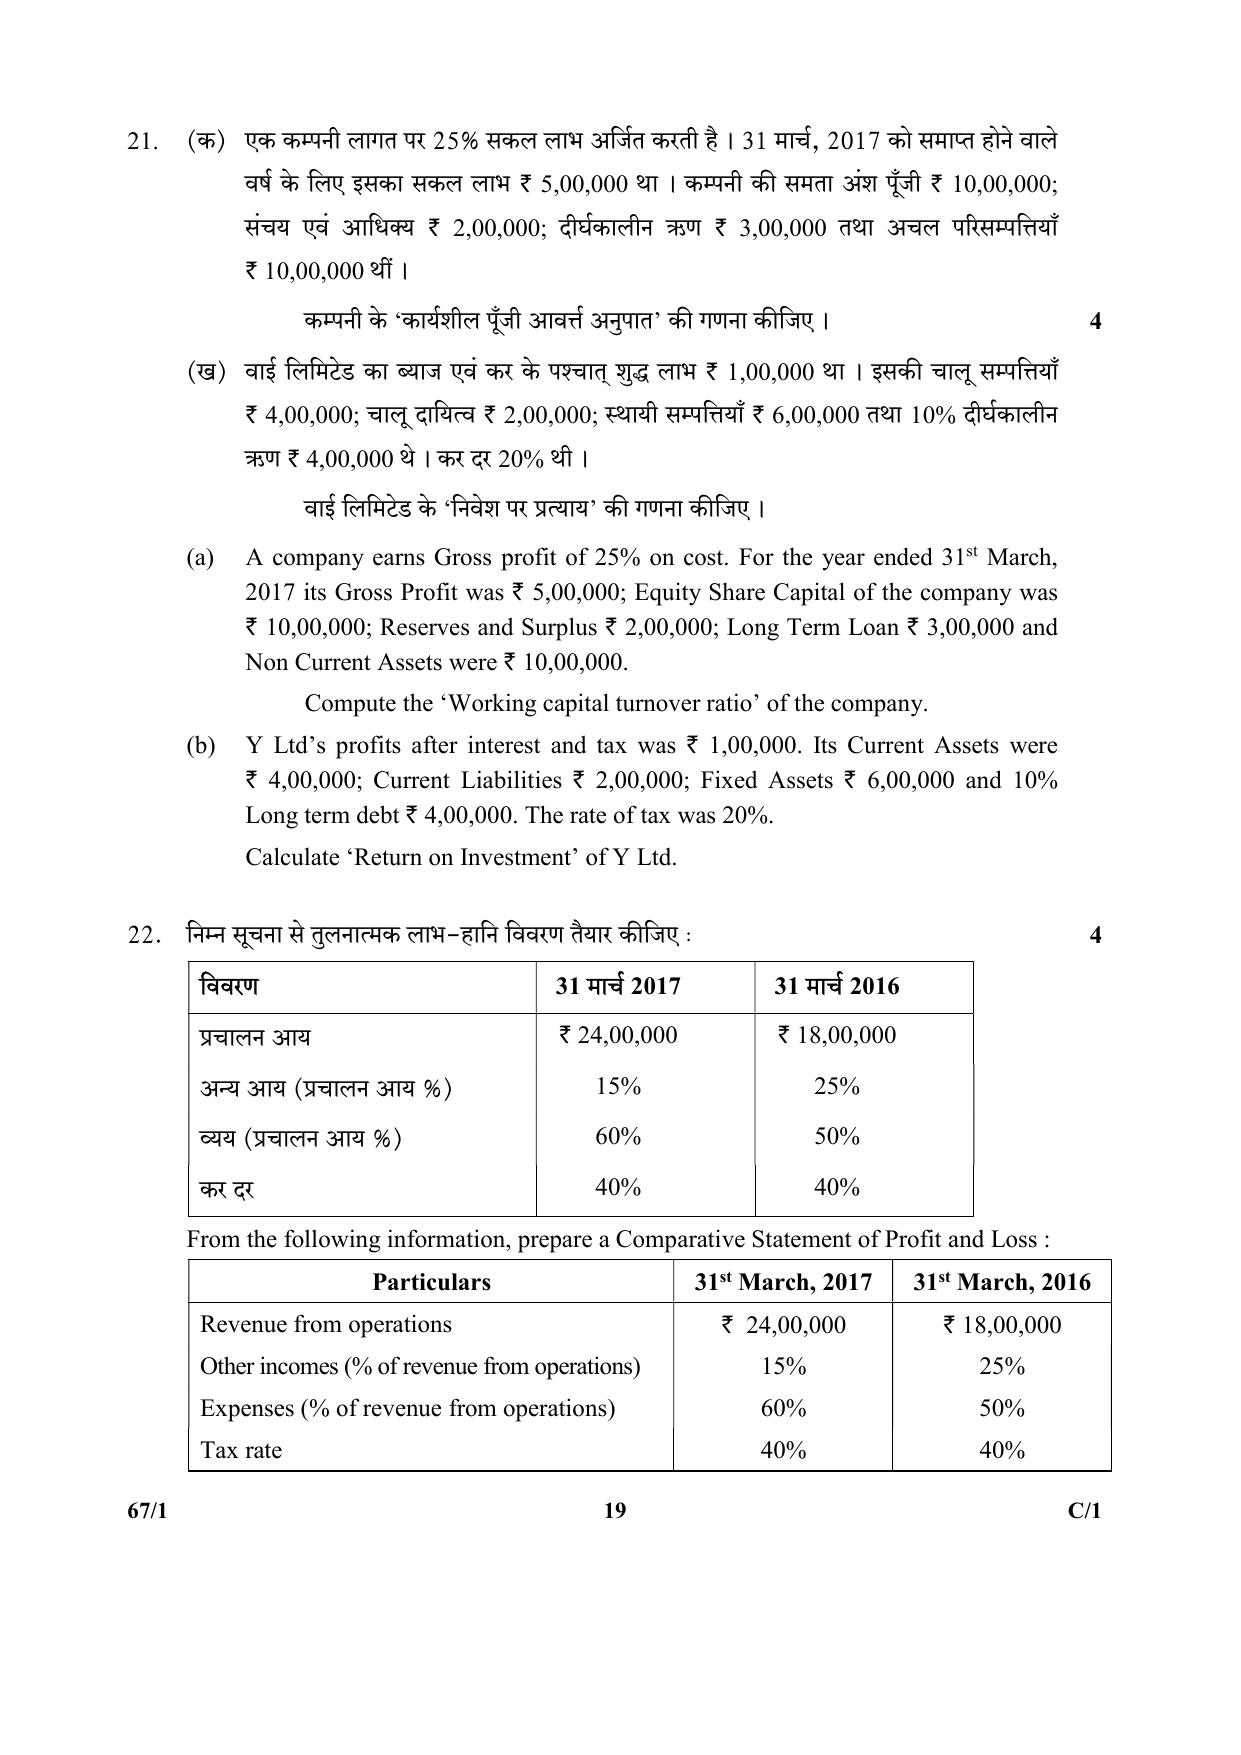 CBSE Class 12 67-1  (Accountancy) 2018 Compartment Question Paper - Page 19